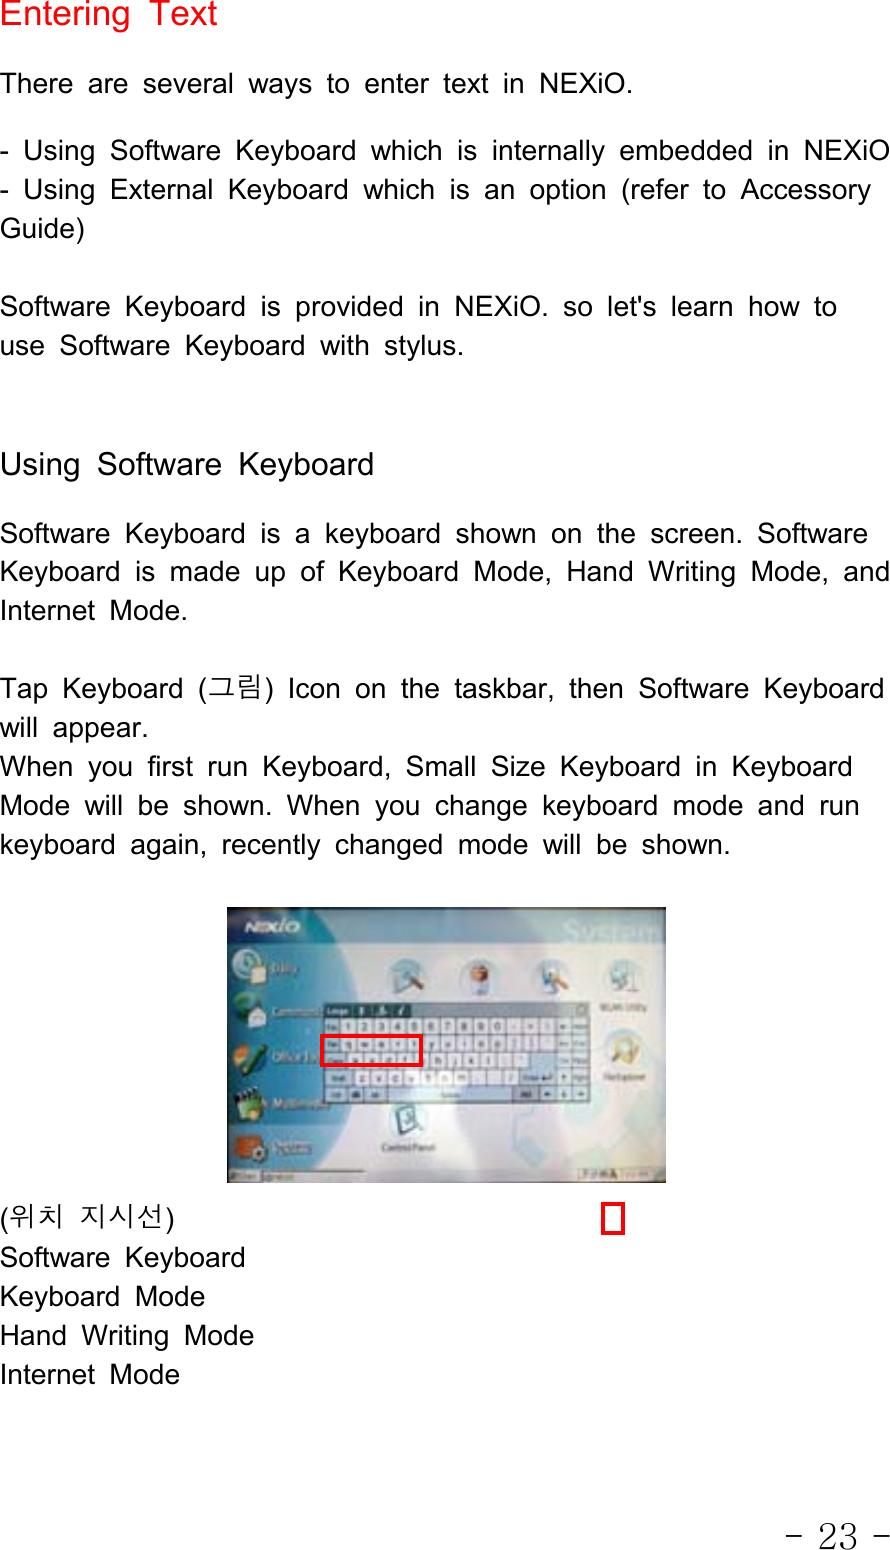 - 23 -Entering TextThere are several ways to enter text in NEXiO.- Using Software Keyboard which is internally embedded in NEXiO- Using External Keyboard which is an option (refer to AccessoryGuide)Software Keyboard is provided in NEXiO. so let&apos;s learn how touse Software Keyboard with stylus.Using Software KeyboardSoftware Keyboard is a keyboard shown on the screen. SoftwareKeyboard is made up of Keyboard Mode, Hand Writing Mode, andInternet Mode.Tap Keyboard (그림) Icon on the taskbar, then Software Keyboardwill appear.When you first run Keyboard, Small Size Keyboard in KeyboardMode will be shown. When you change keyboard mode and runkeyboard again, recently changed mode will be shown.(위치 지시선)Software KeyboardKeyboard ModeHand Writing ModeInternet Mode